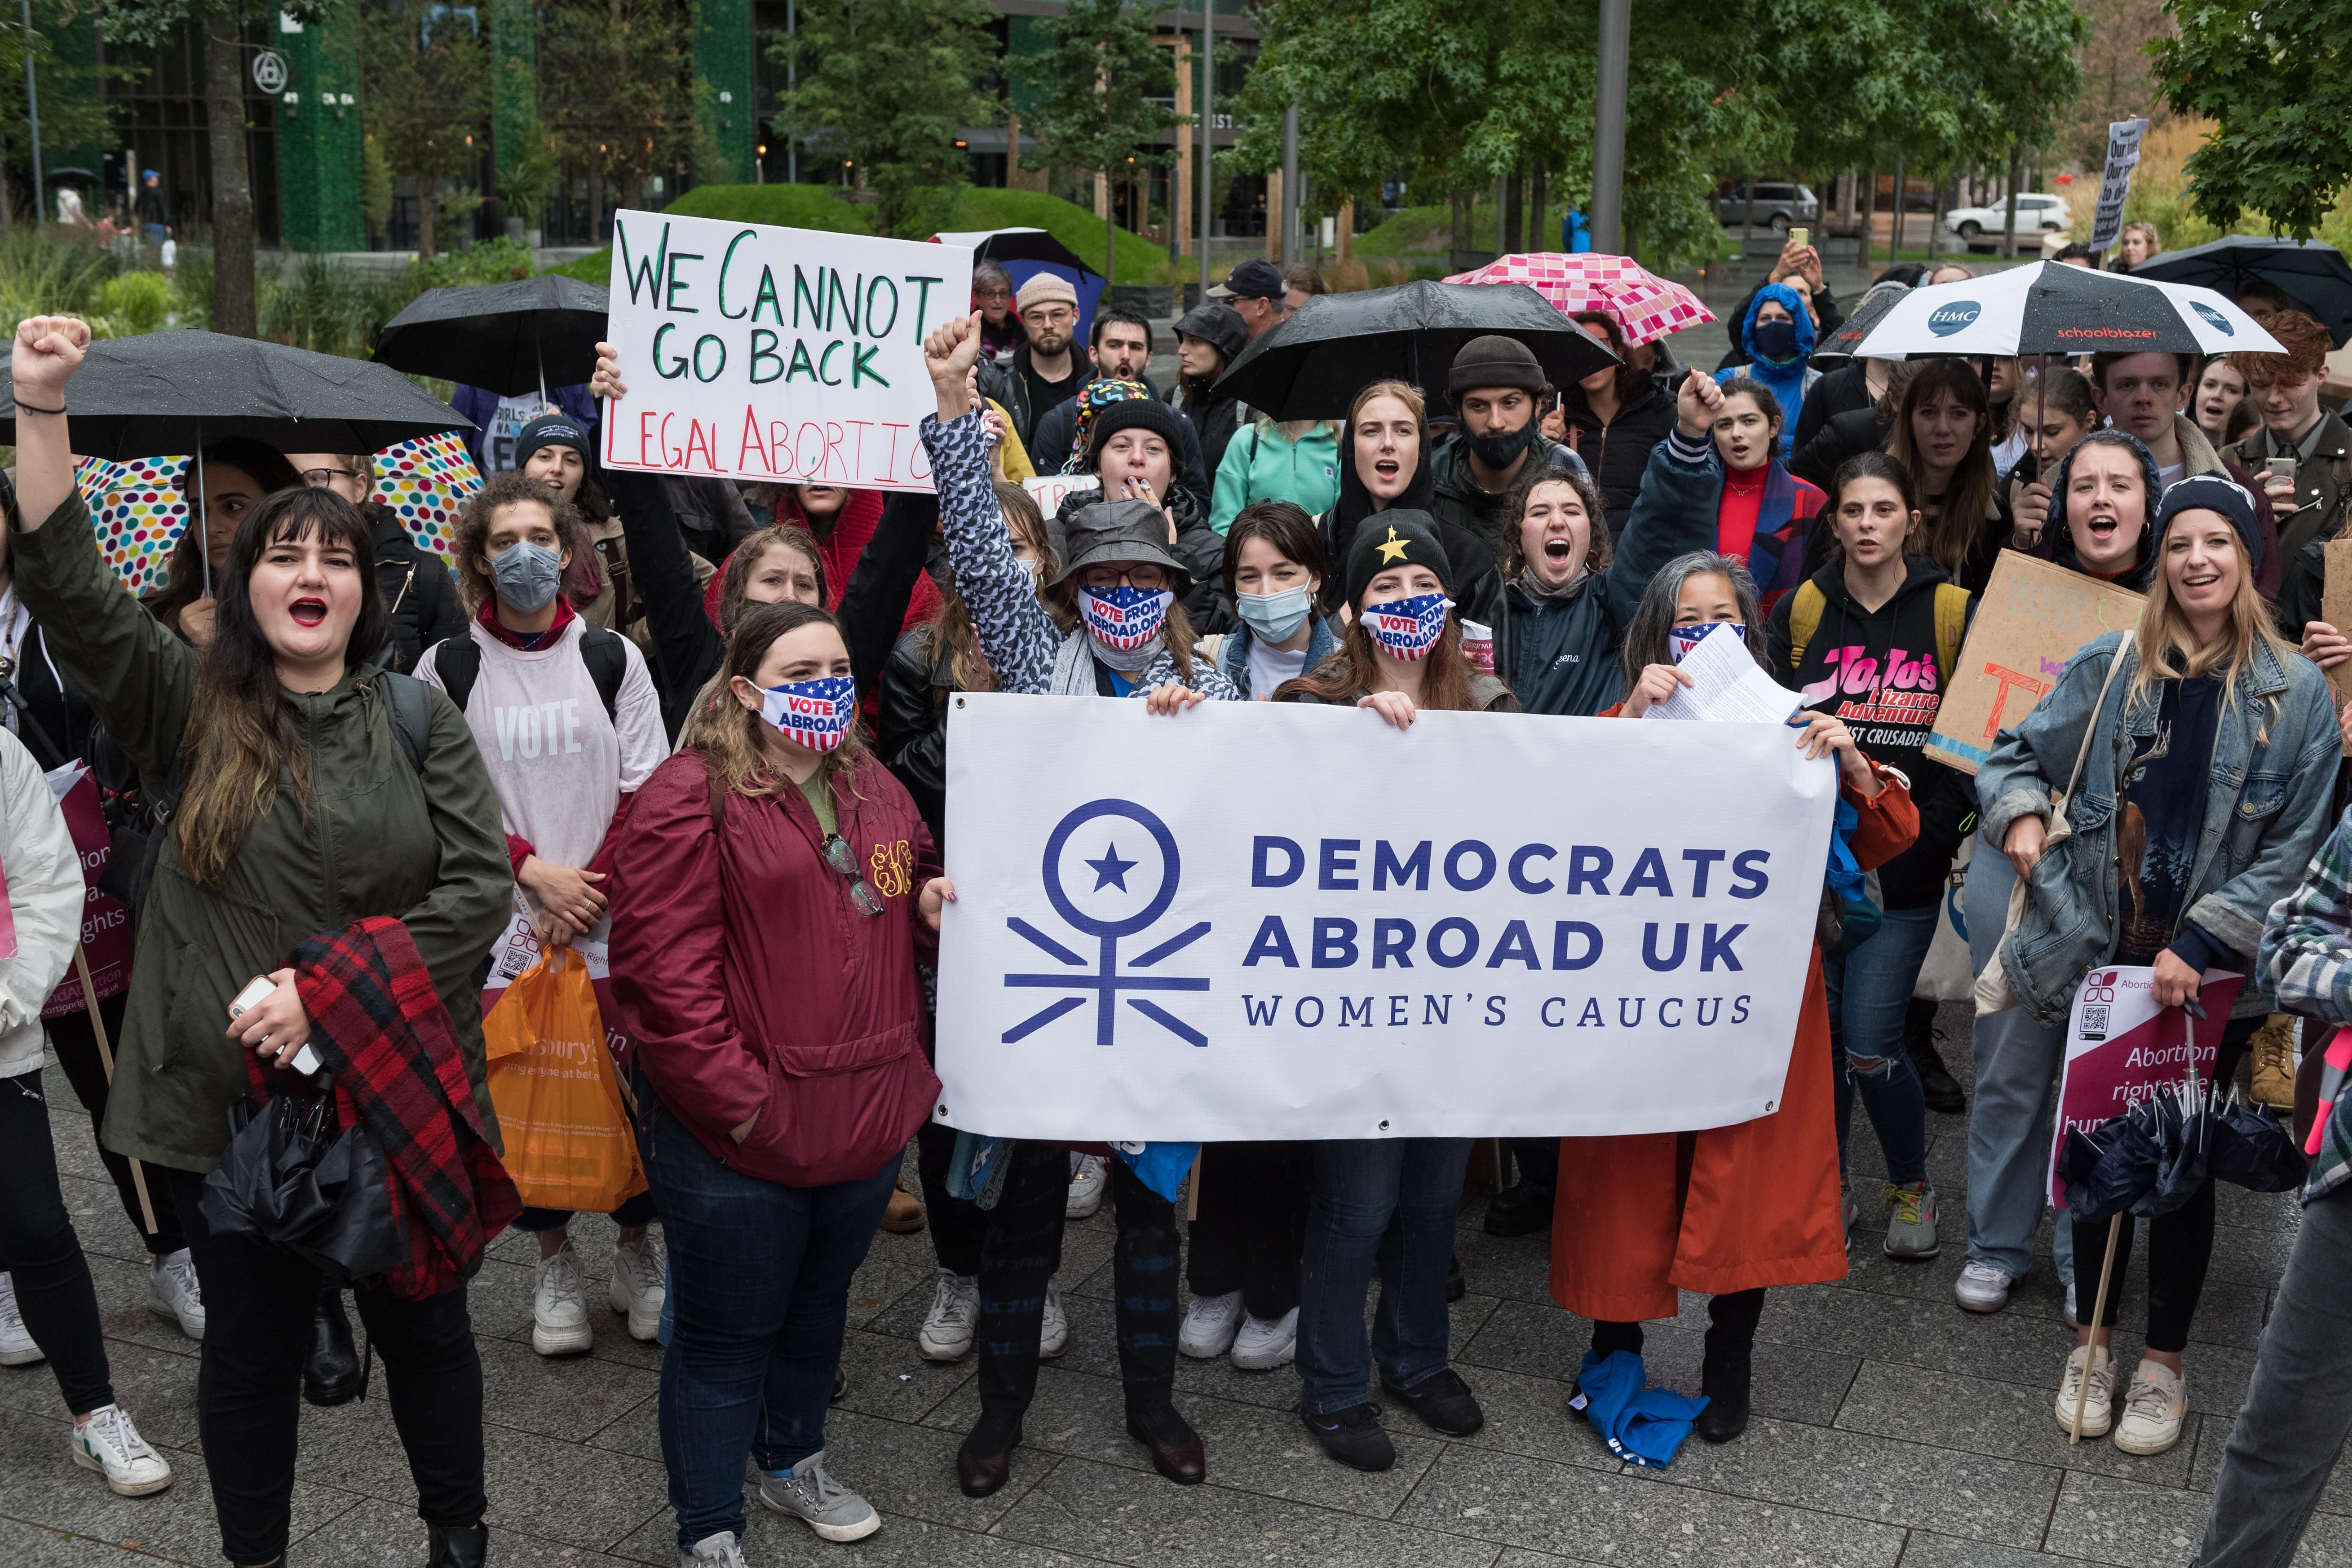 Pro-choice supporters demonstrating outside the U.S. Embassy in London on Oct. 2.